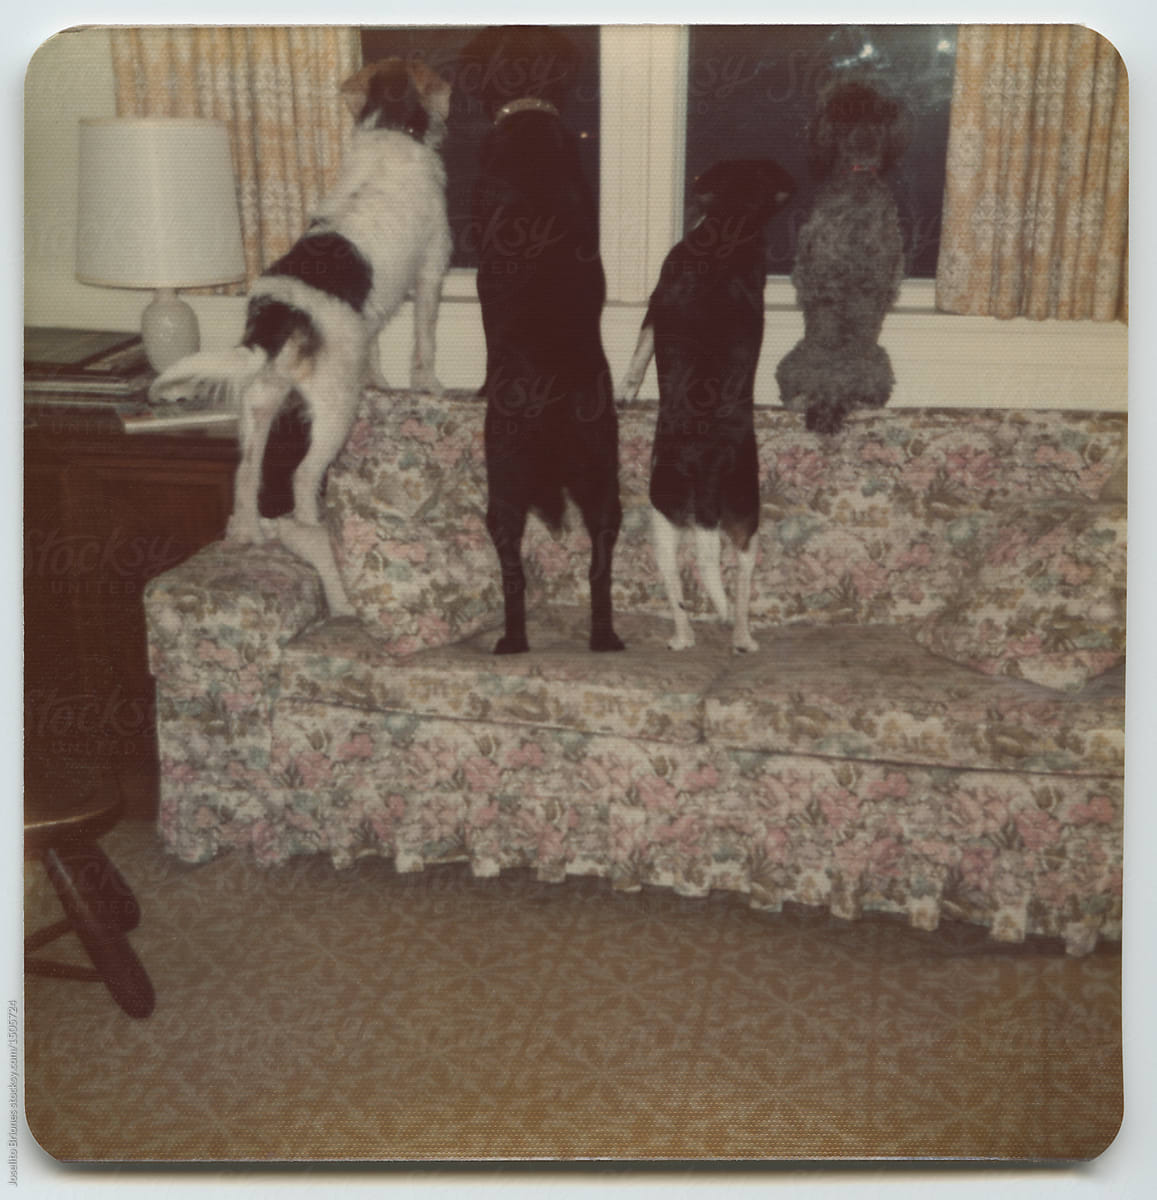 Pet dogs in a line looking out the window from the back of a couch in vintage photo